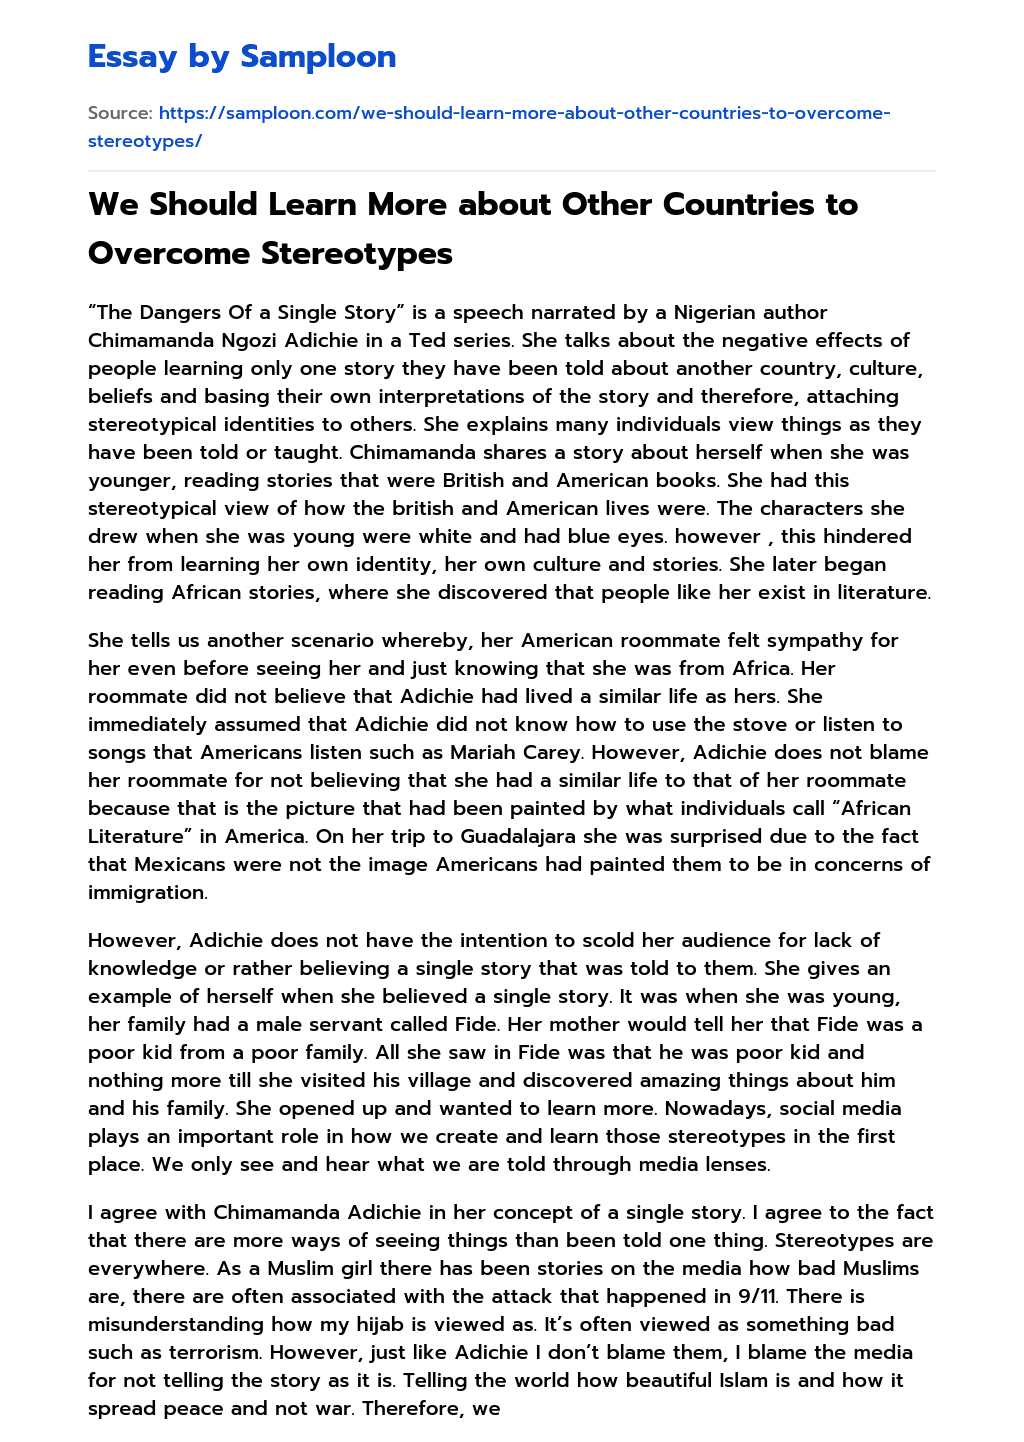 We Should Learn More about Other Countries to Overcome Stereotypes essay